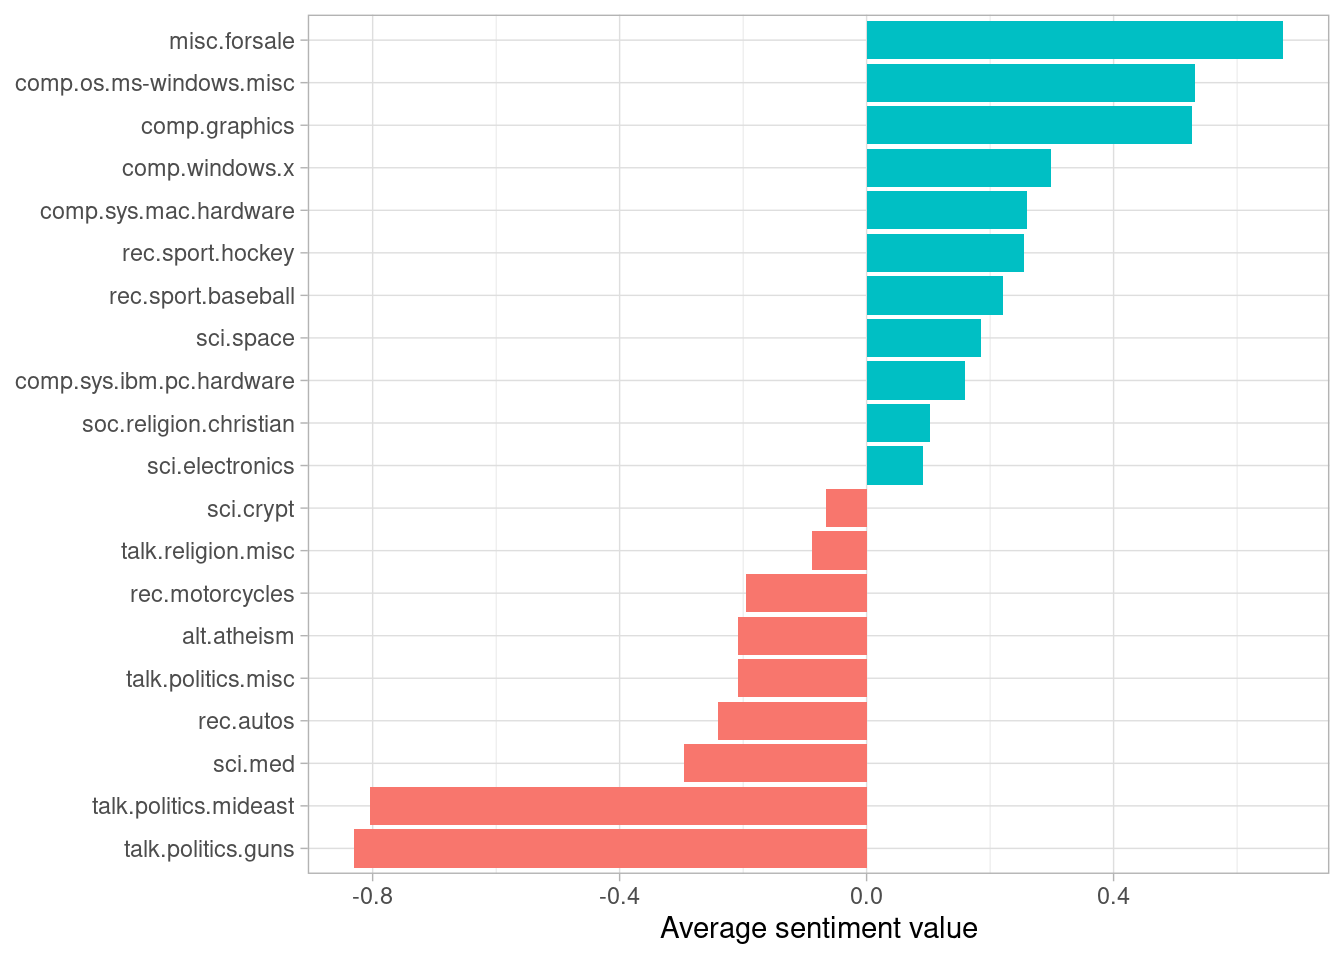 Average AFINN value for posts within each newsgroup